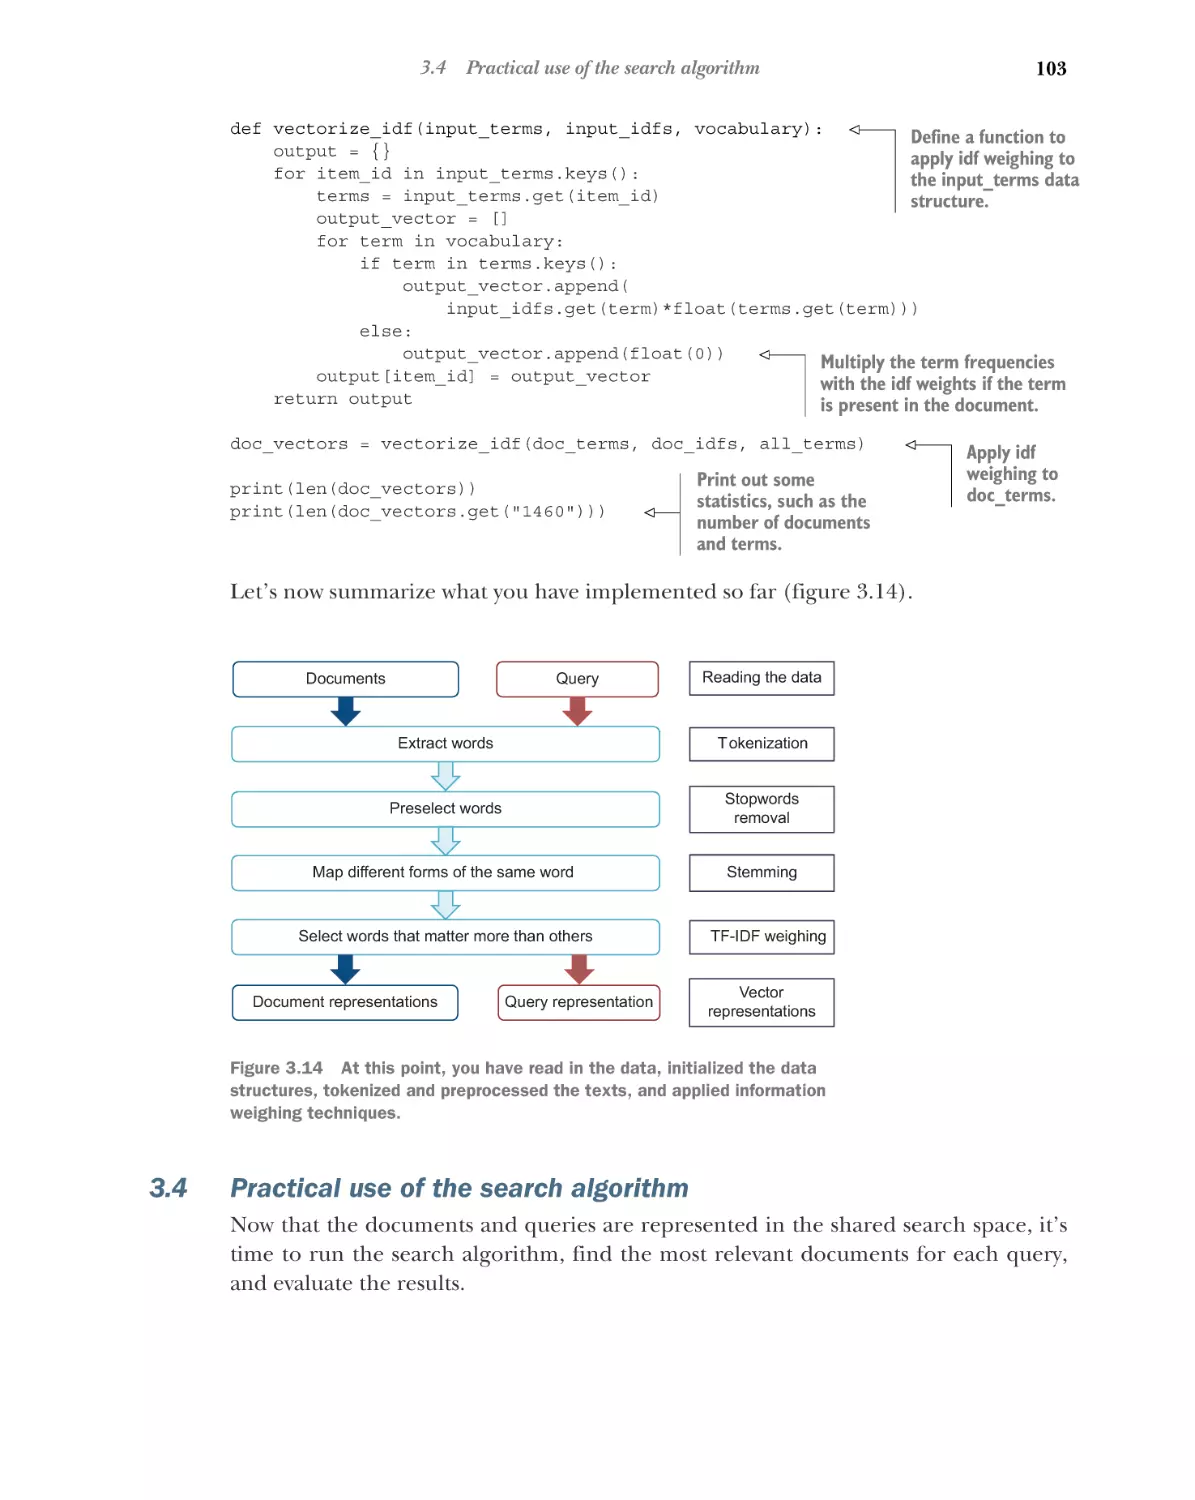 3.4 Practical use of the search algorithm